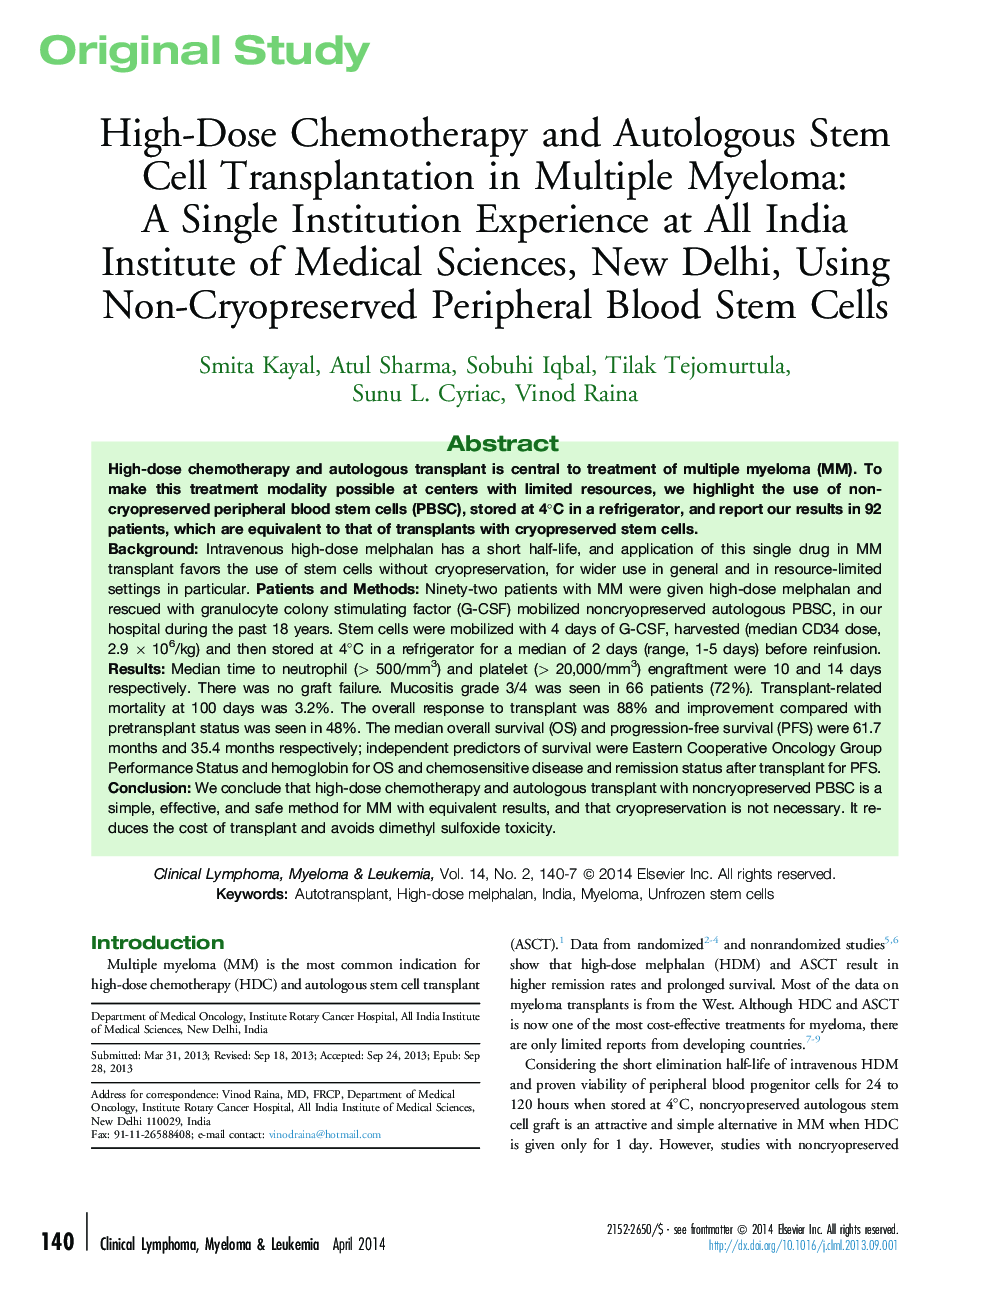 High-Dose Chemotherapy and Autologous Stem Cell Transplantation in Multiple Myeloma: A Single Institution Experience at All India Institute of Medical Sciences, New Delhi, Using Non-Cryopreserved Peripheral Blood Stem Cells